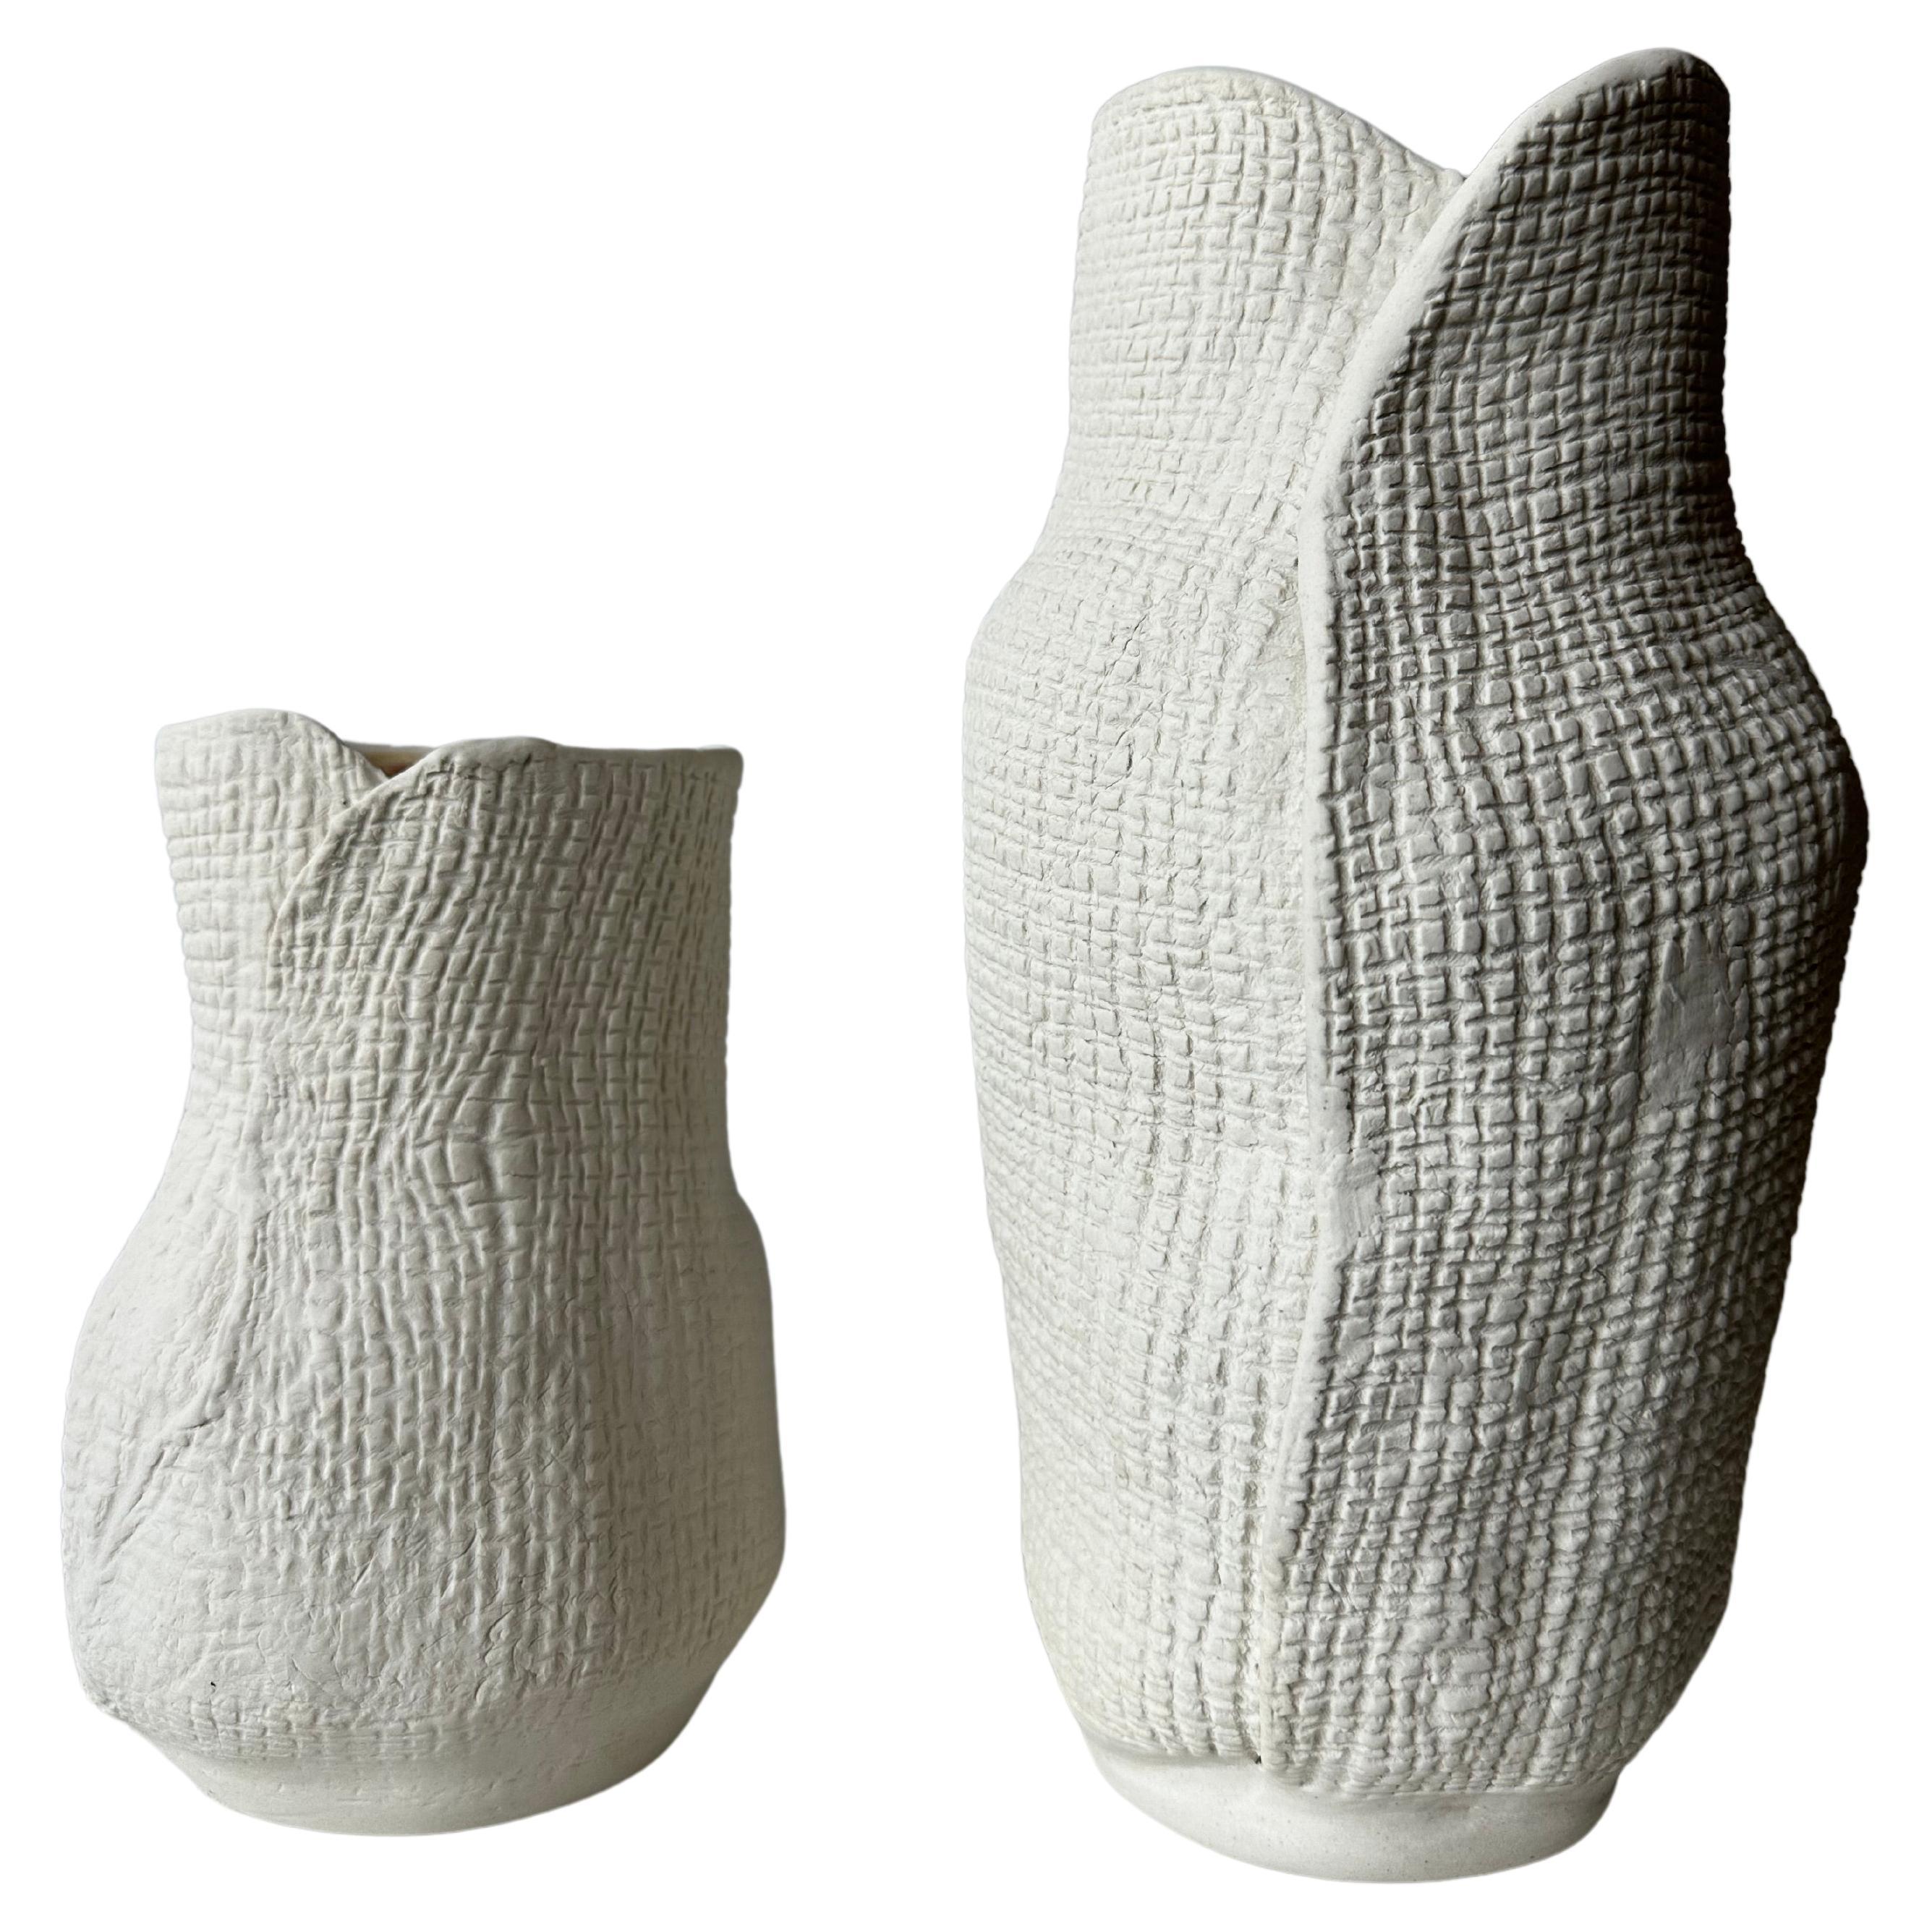 Pair of Struttura Ceramic Textured Vases by Cym Warkov For Sale